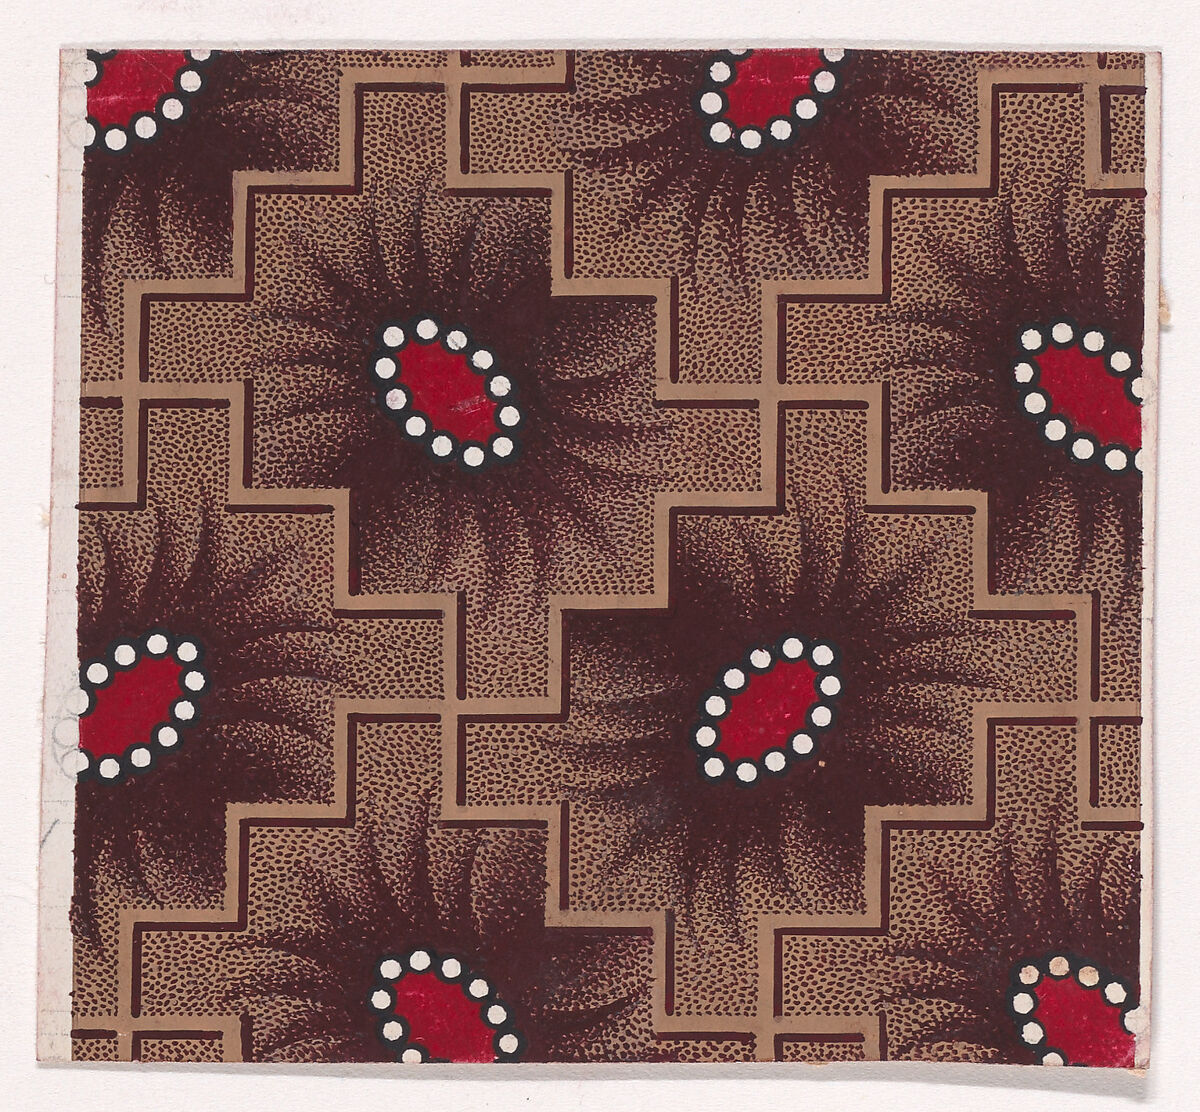 Textile Design with Alternating Shuttle-Shaped Motifs Framed by Pearls and with Offsetting Palmettes Framed by a Checked Pattern of Intersecting Zig-Zagging Diagonal Lines, Anonymous, Alsatian, 19th century, Gouache 